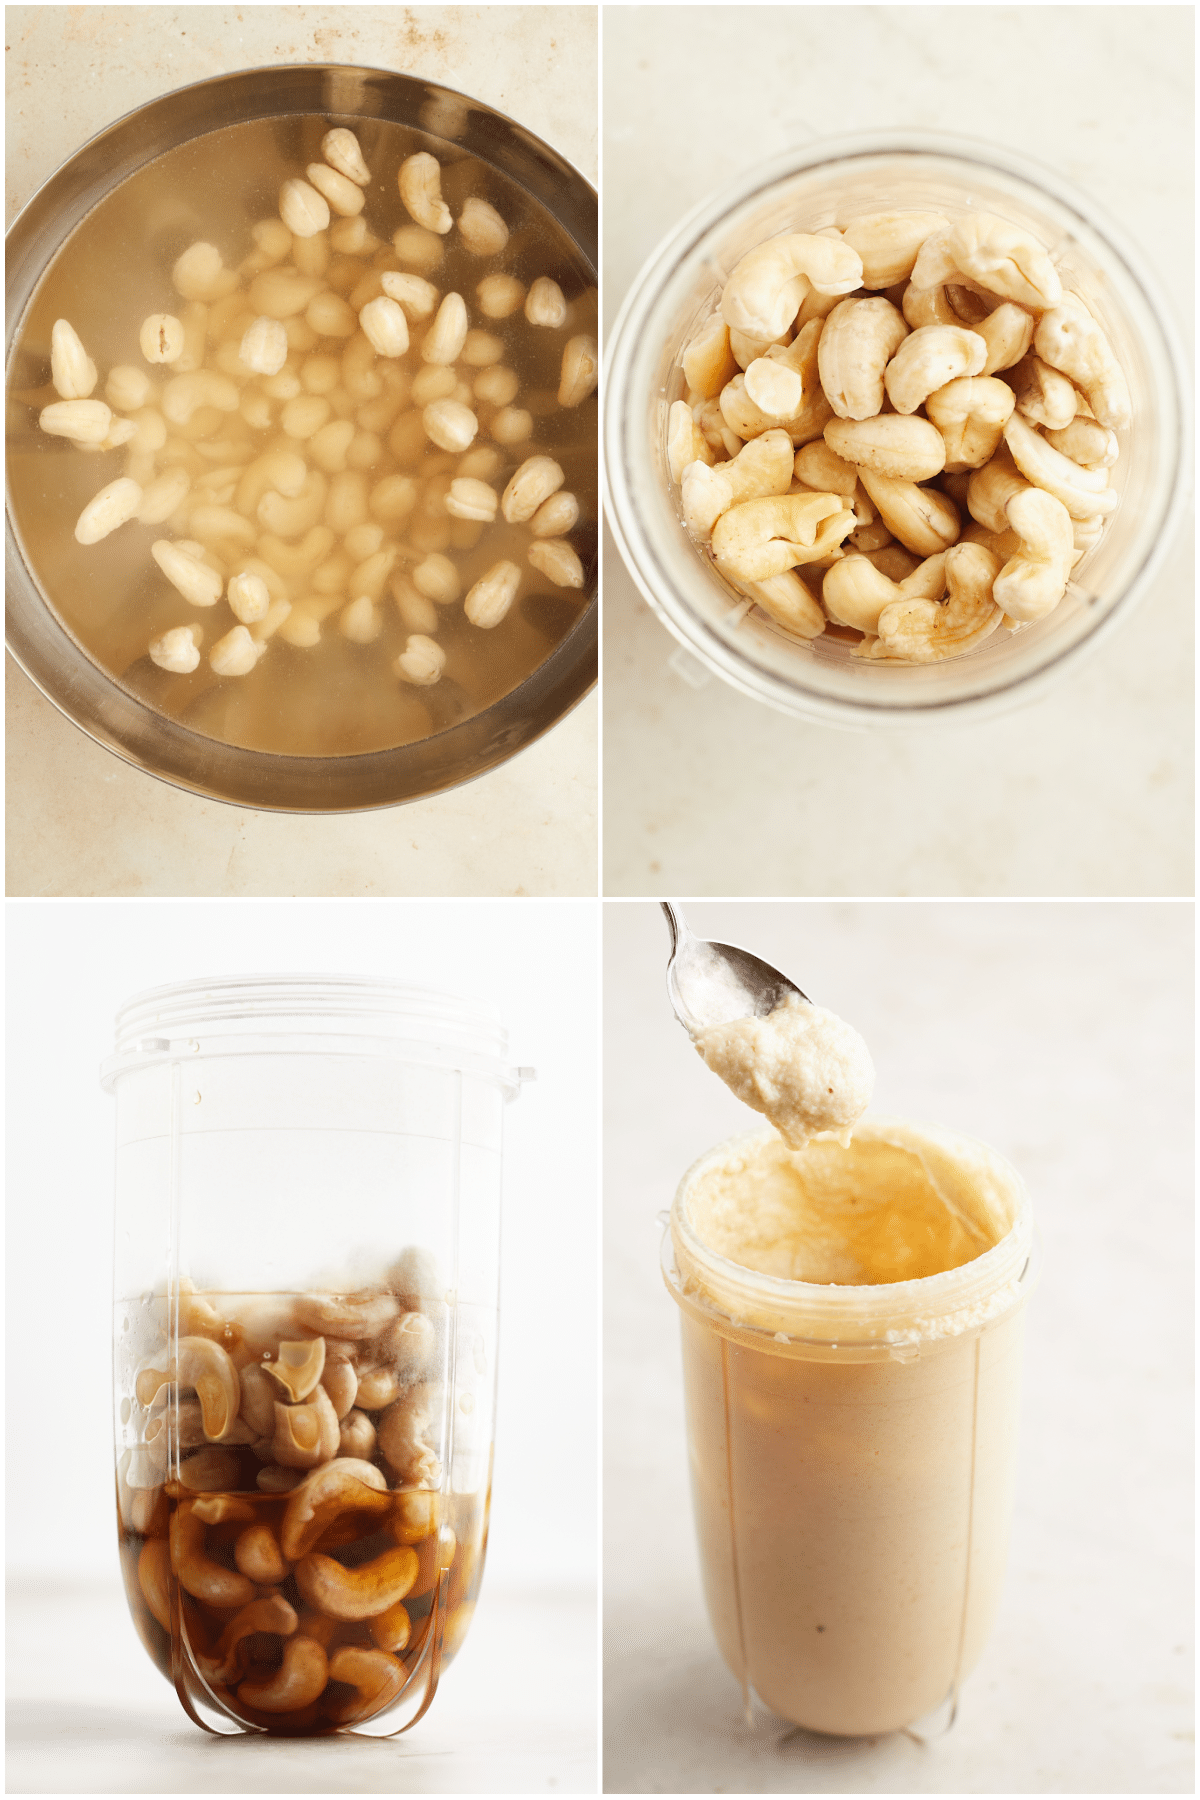 A four image collage showing how to make maple cashew cream: soak cashews in hot water, drain, add maple syrup, blend until smooth.